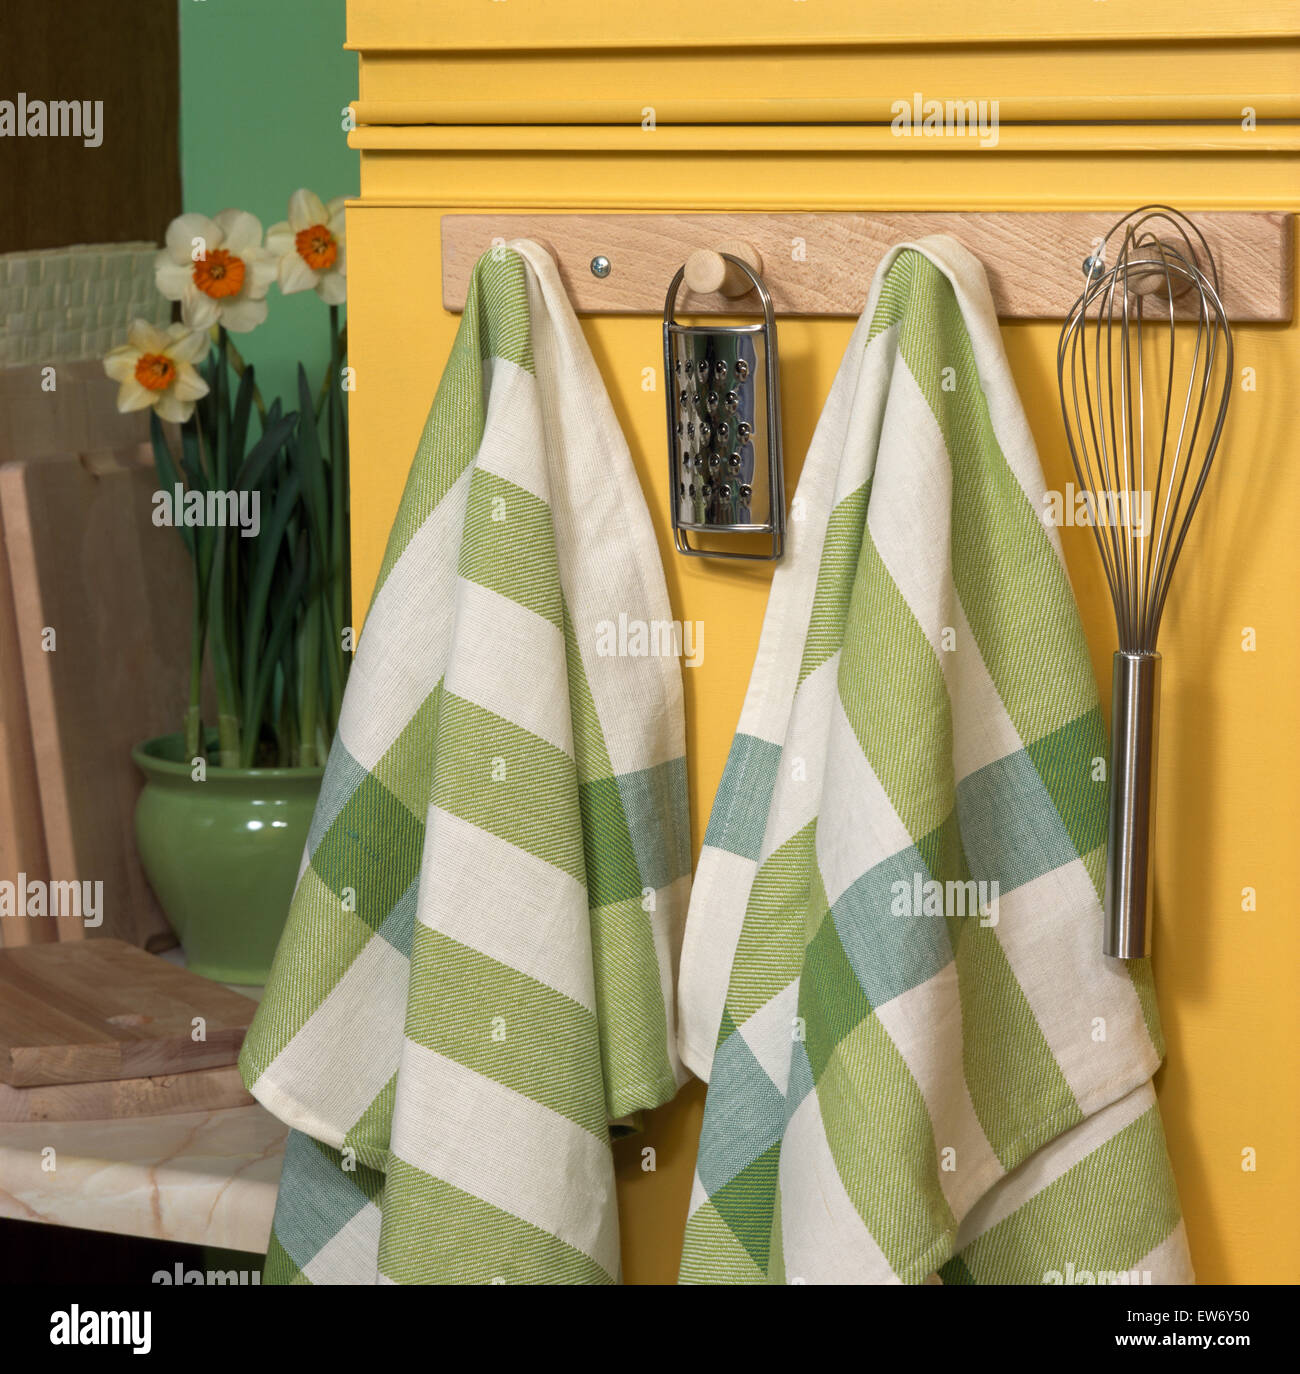 https://c8.alamy.com/comp/EW6Y50/close-up-of-green-checked-tea-towels-on-a-peg-board-with-kitchen-utensils-EW6Y50.jpg